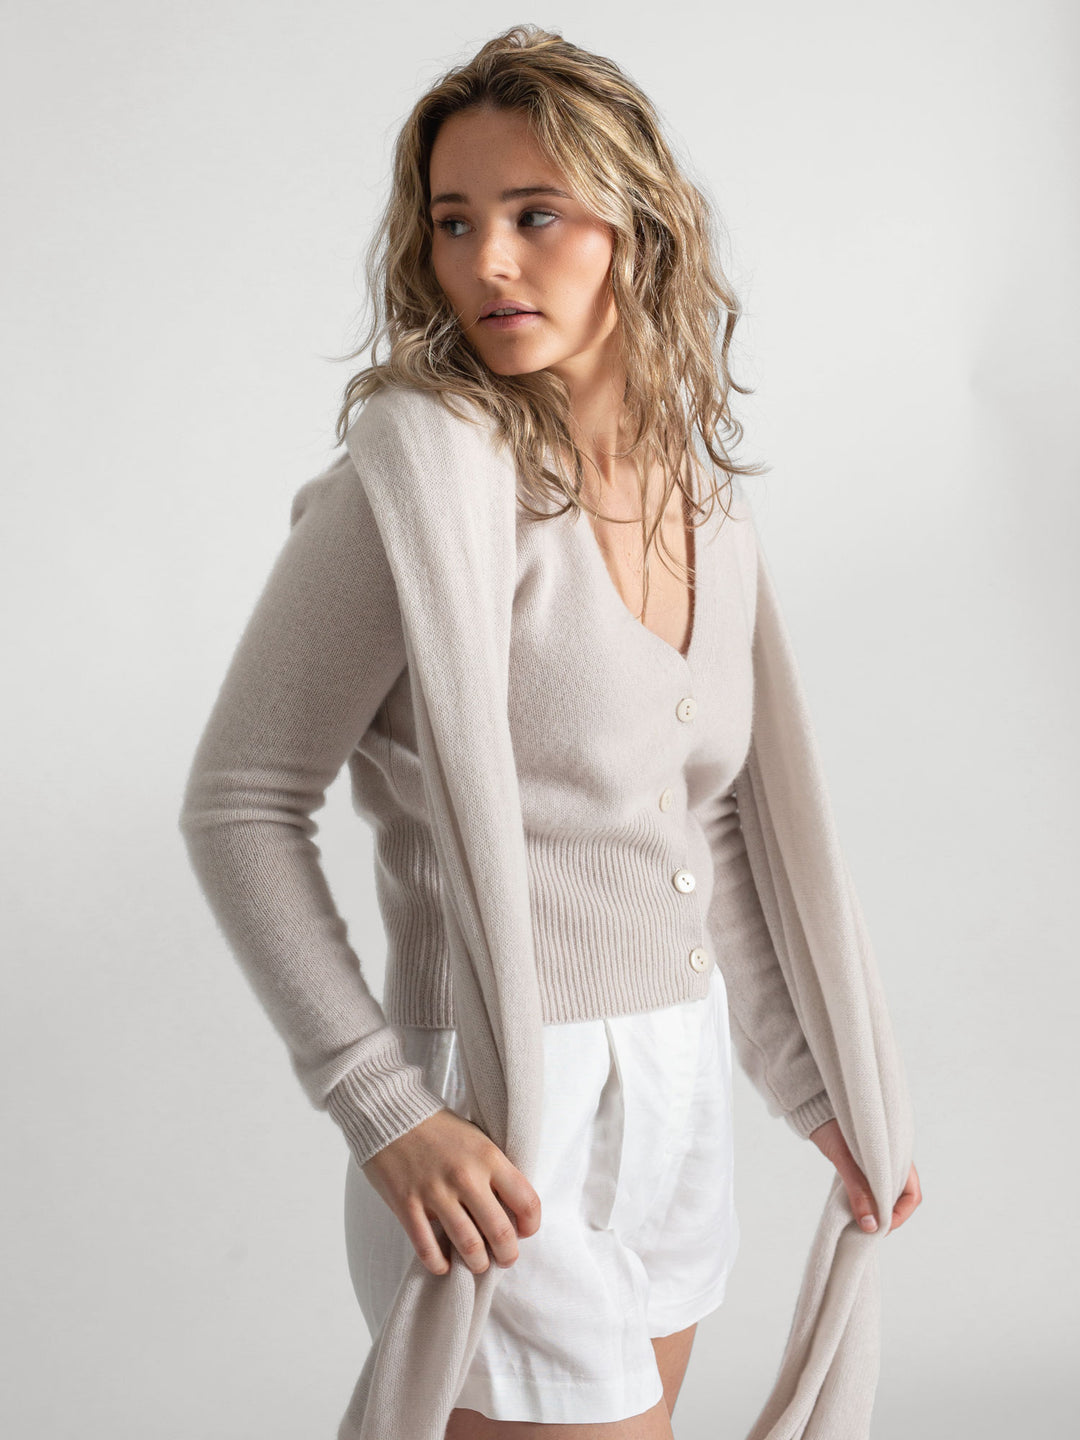  Cashmere cardigan puff sleeves, long sleeves, 100% pure cashmere, Scandinavian design, color: Cold Creme.